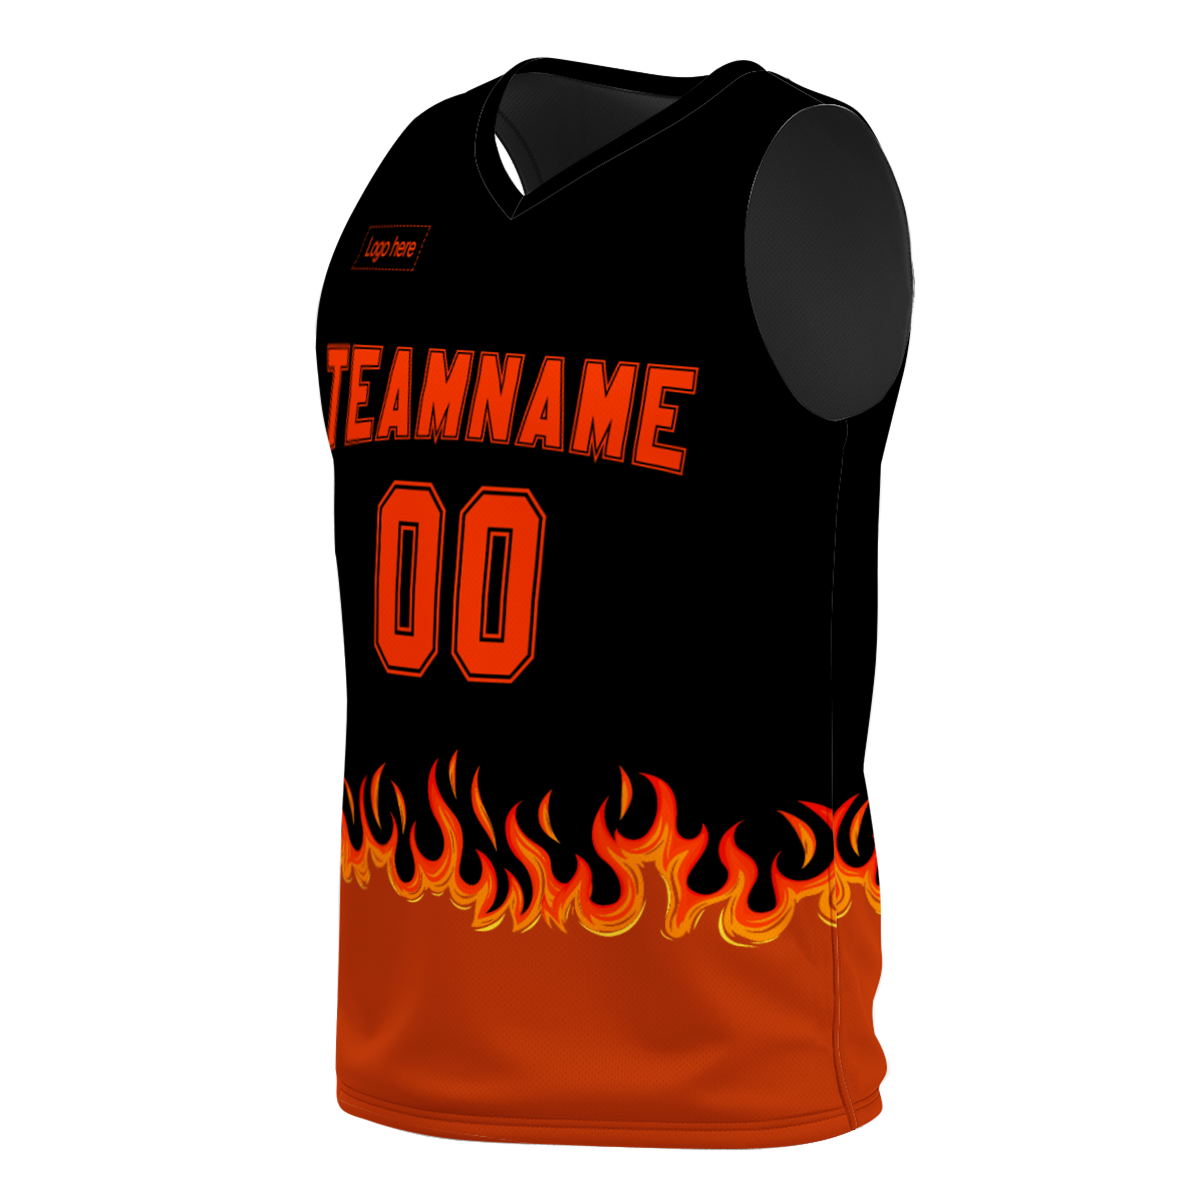 new-design-competitive-polyester-basketball-uniforms-digital-print-on-demand-basketball-suits-at-cj-pod-5